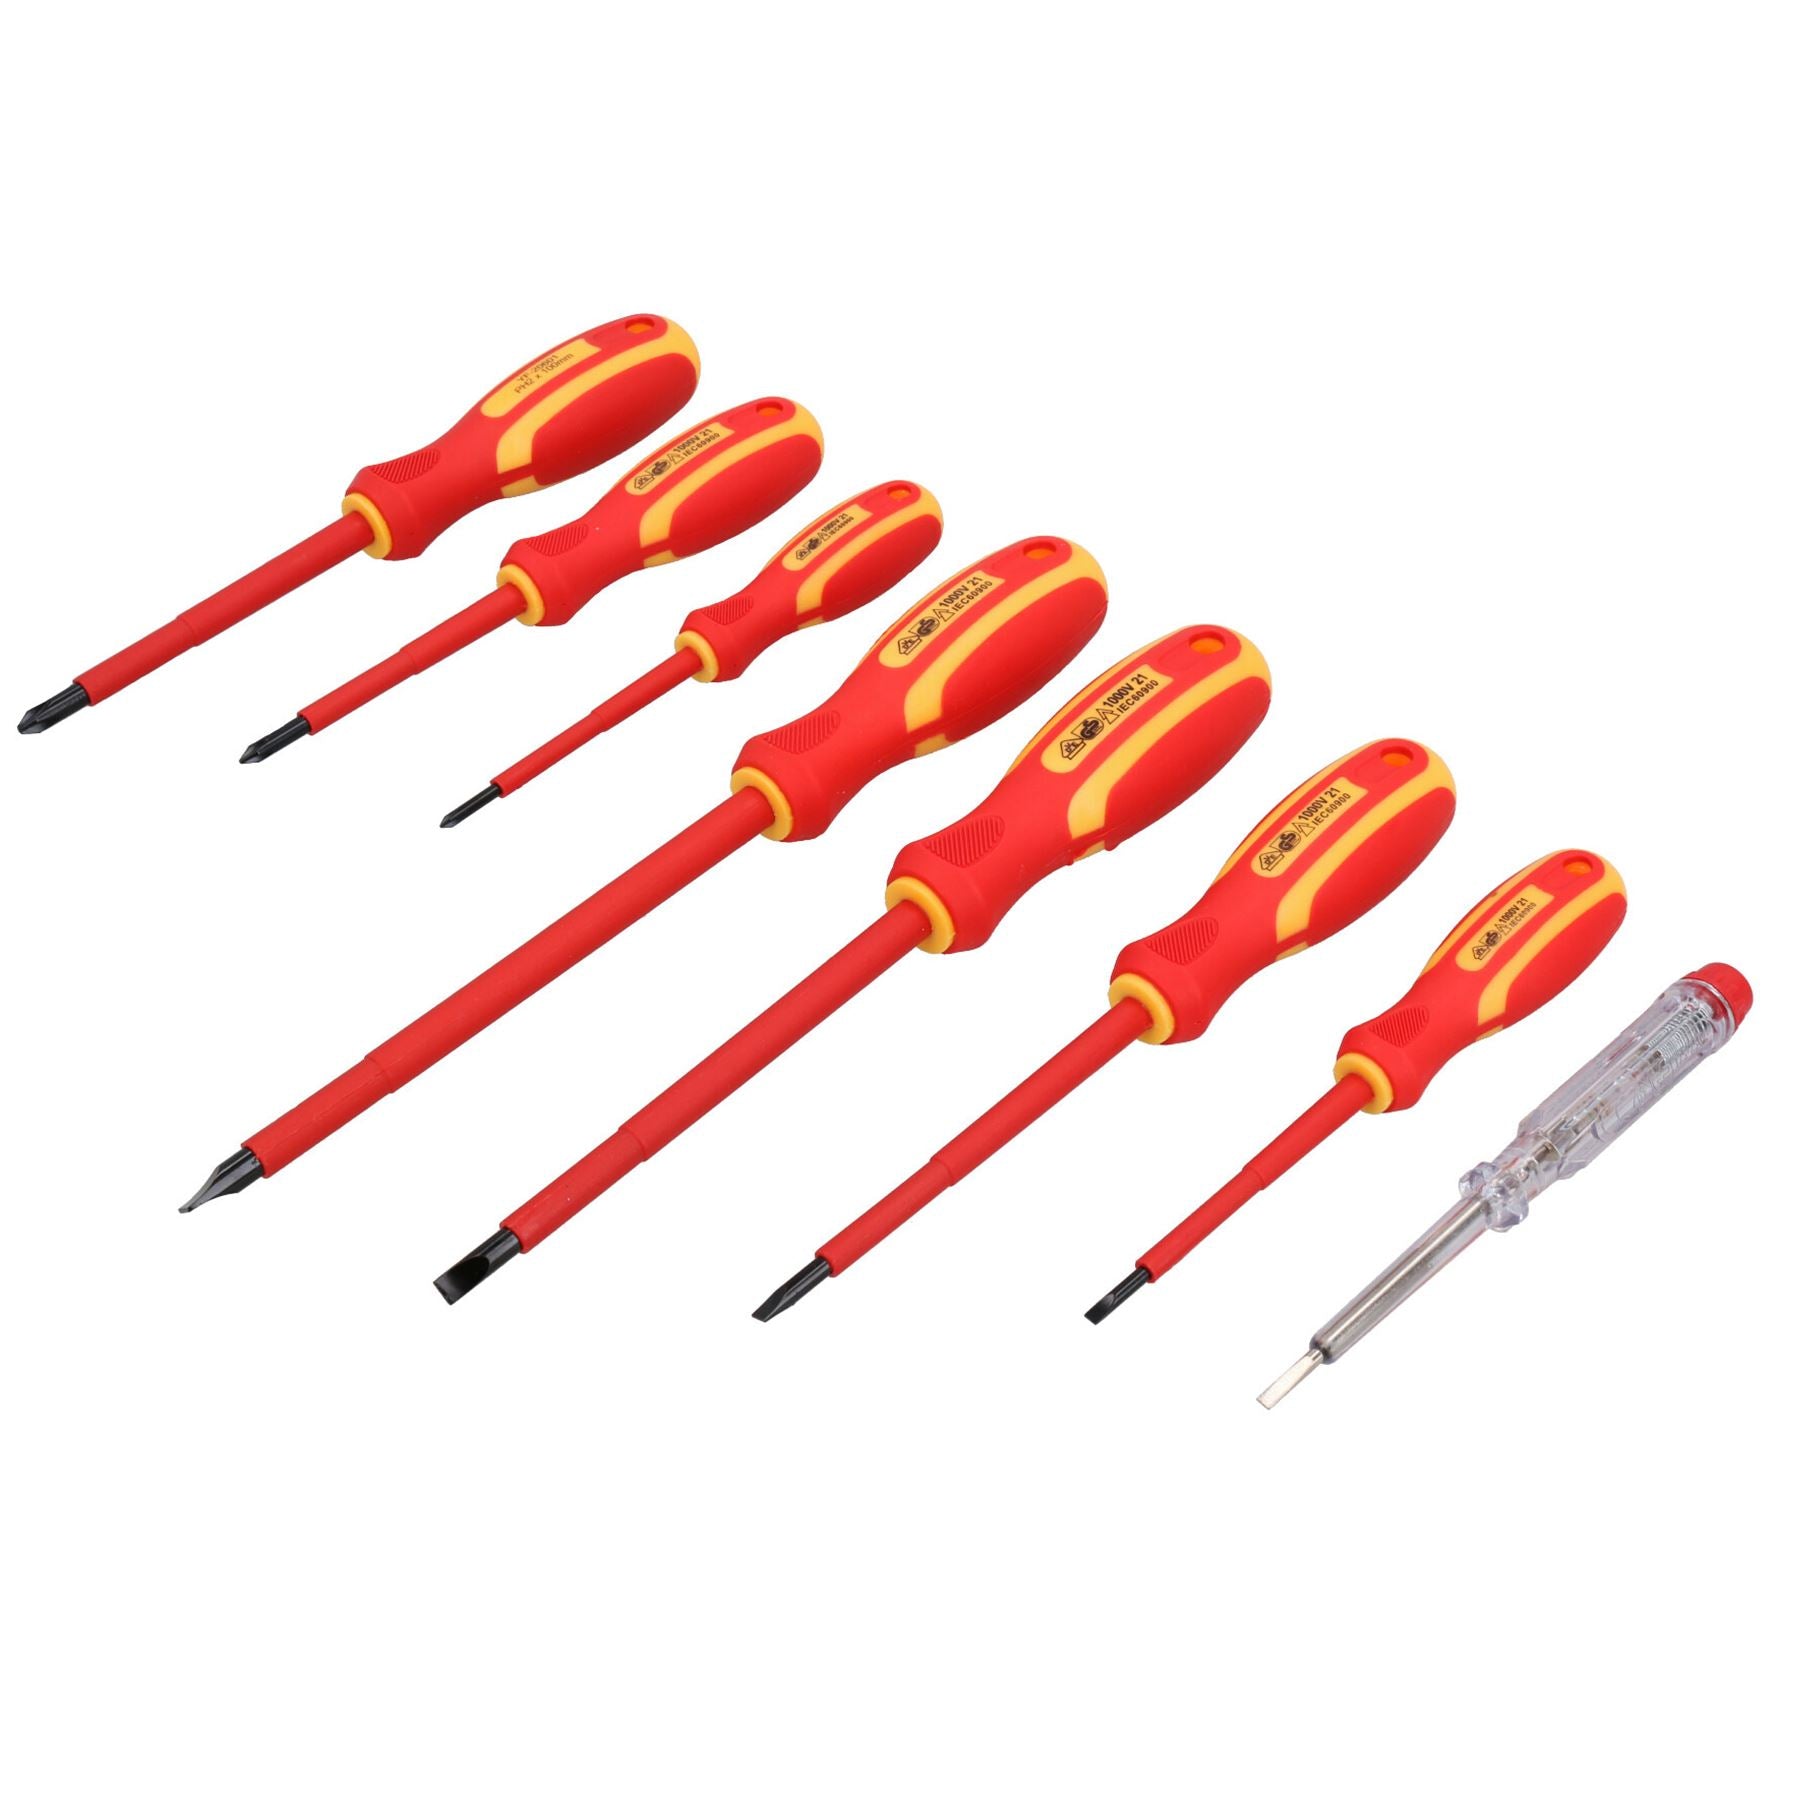 VDE Insulated Electrical Screwdrivers + Mains Tester Phillips Flat 8pc